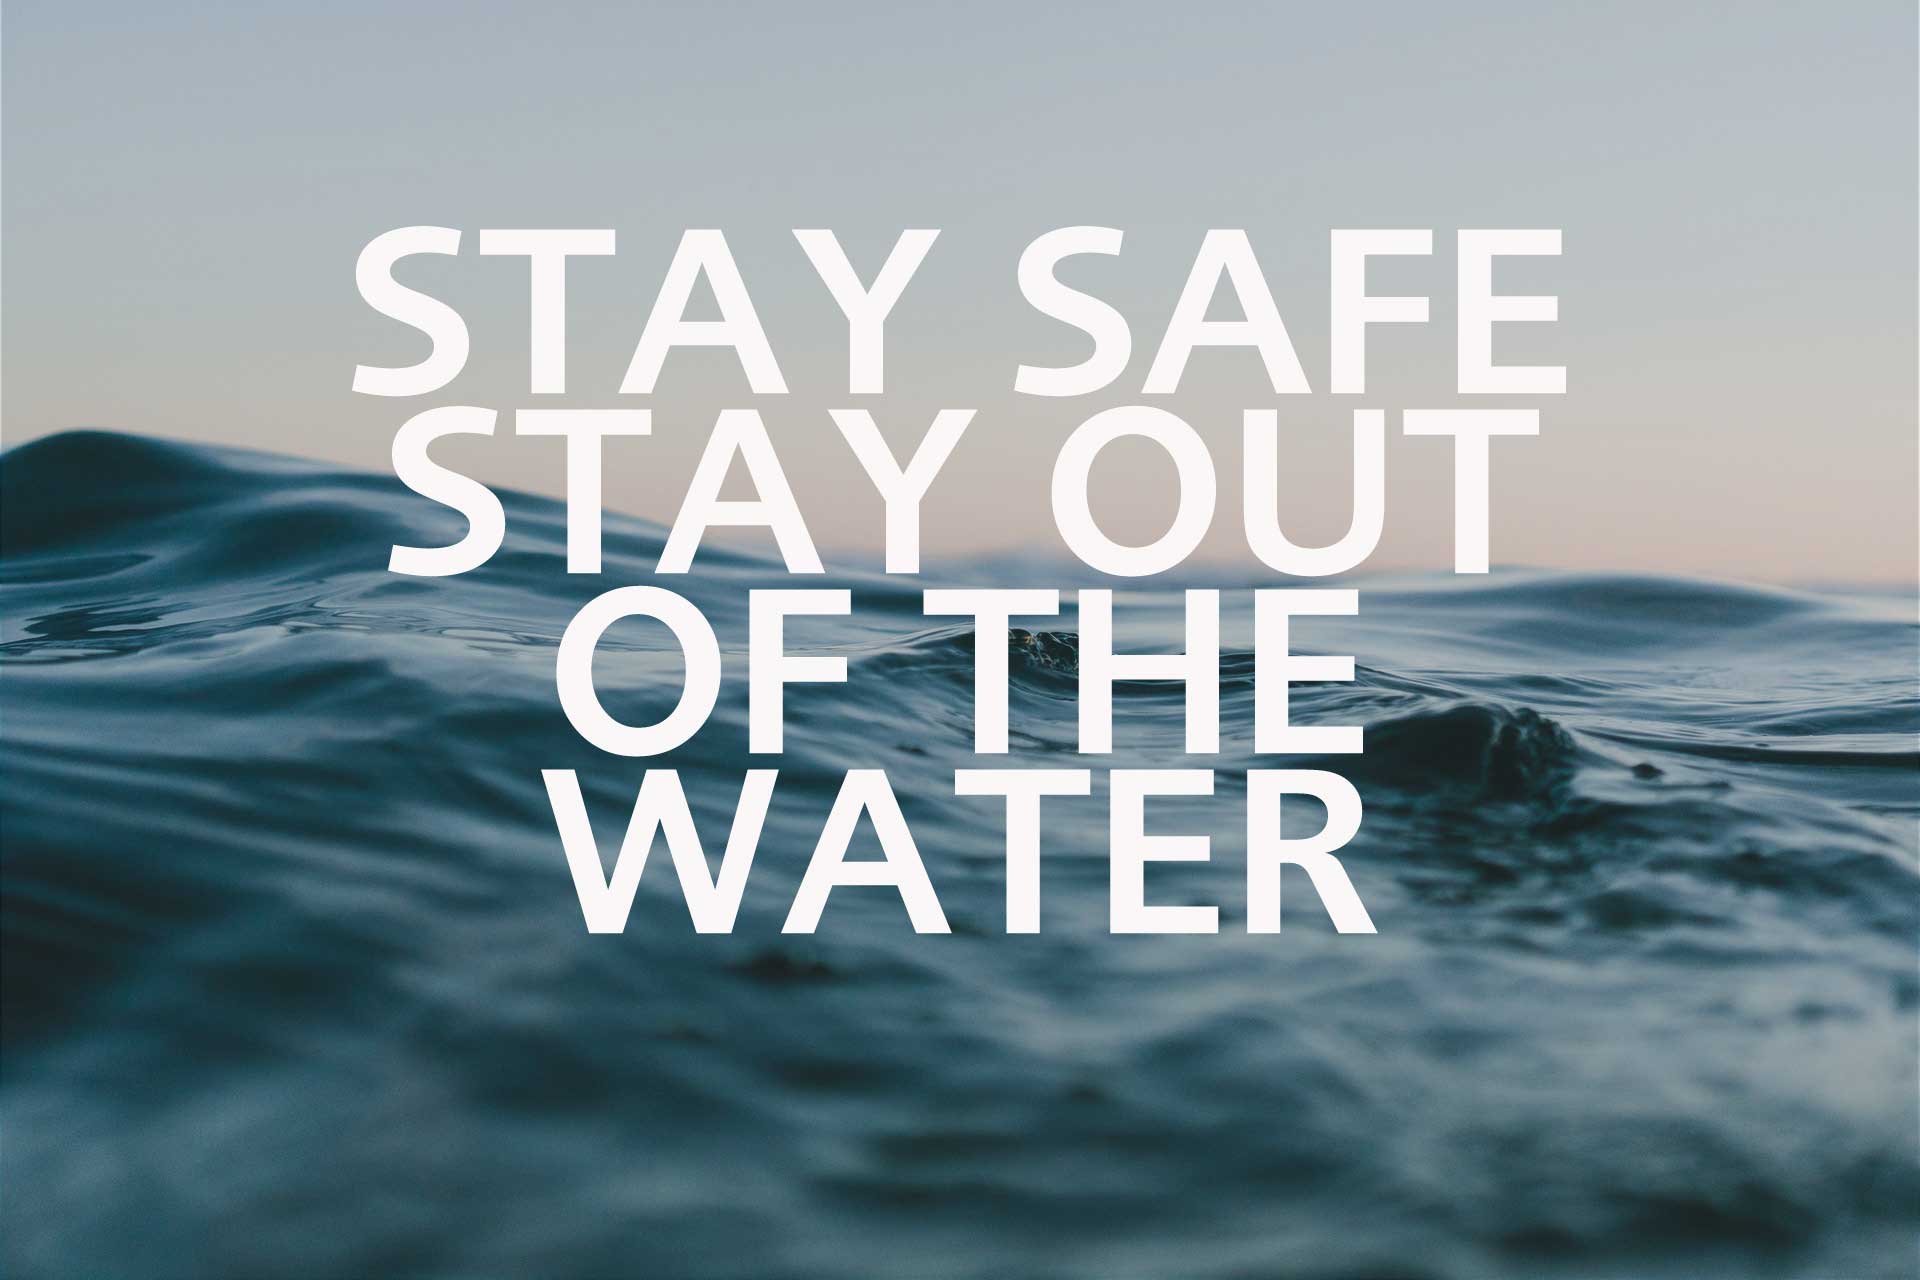 Stay safe and stay out of the water